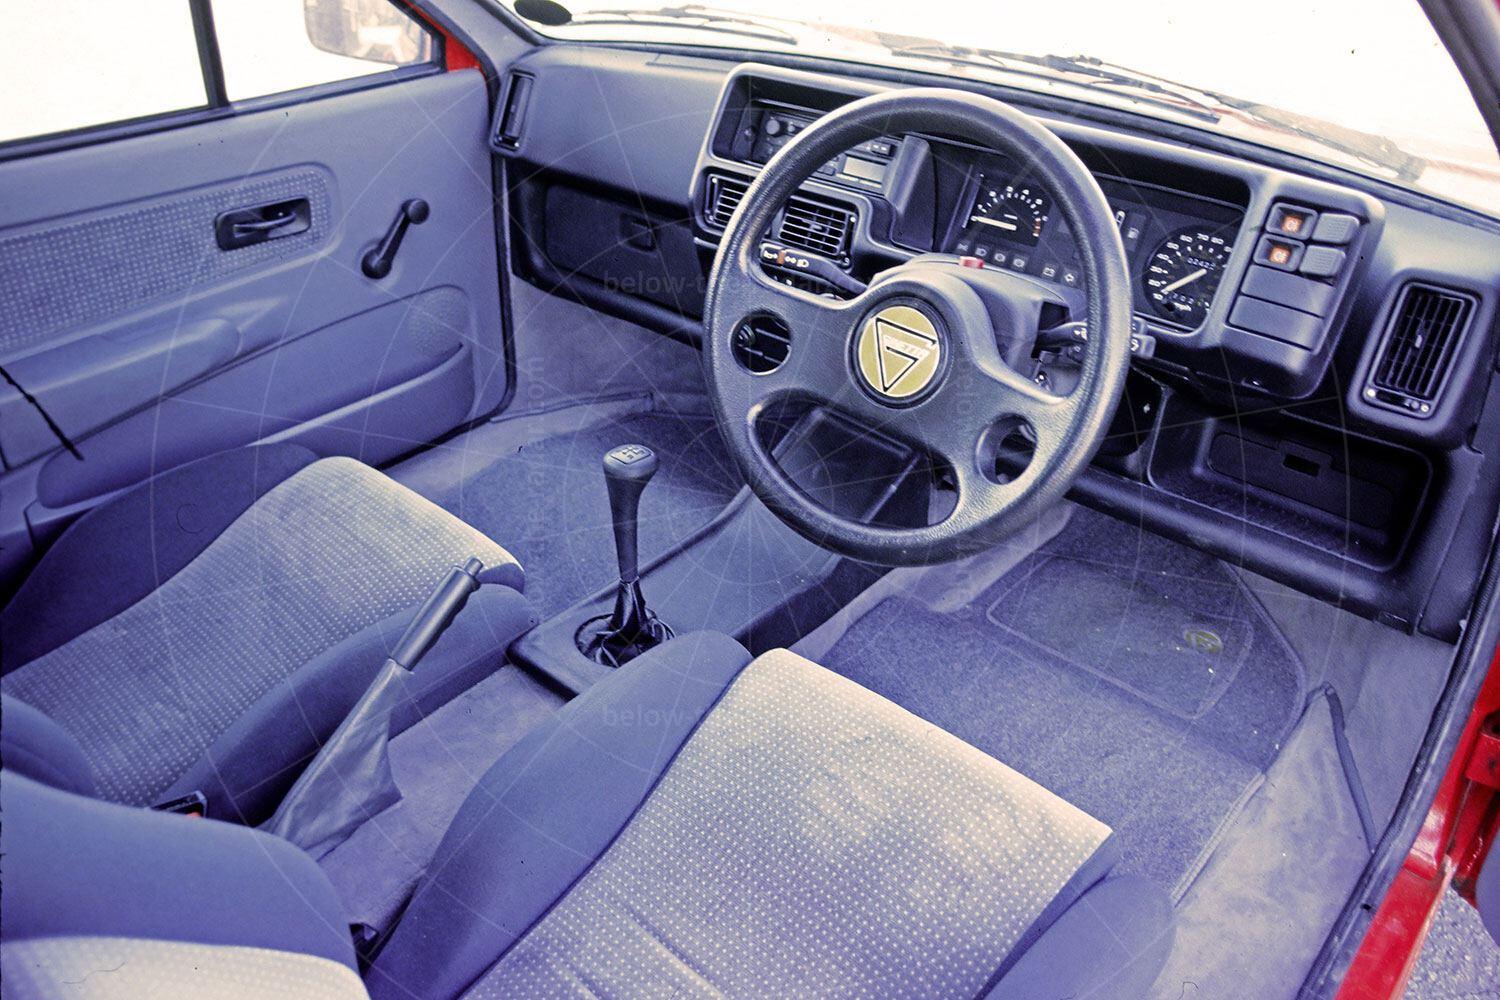 The interior of the Auto Express G32 test car Pic: magiccarpics.co.uk | The interior of the Auto Express G32 test car